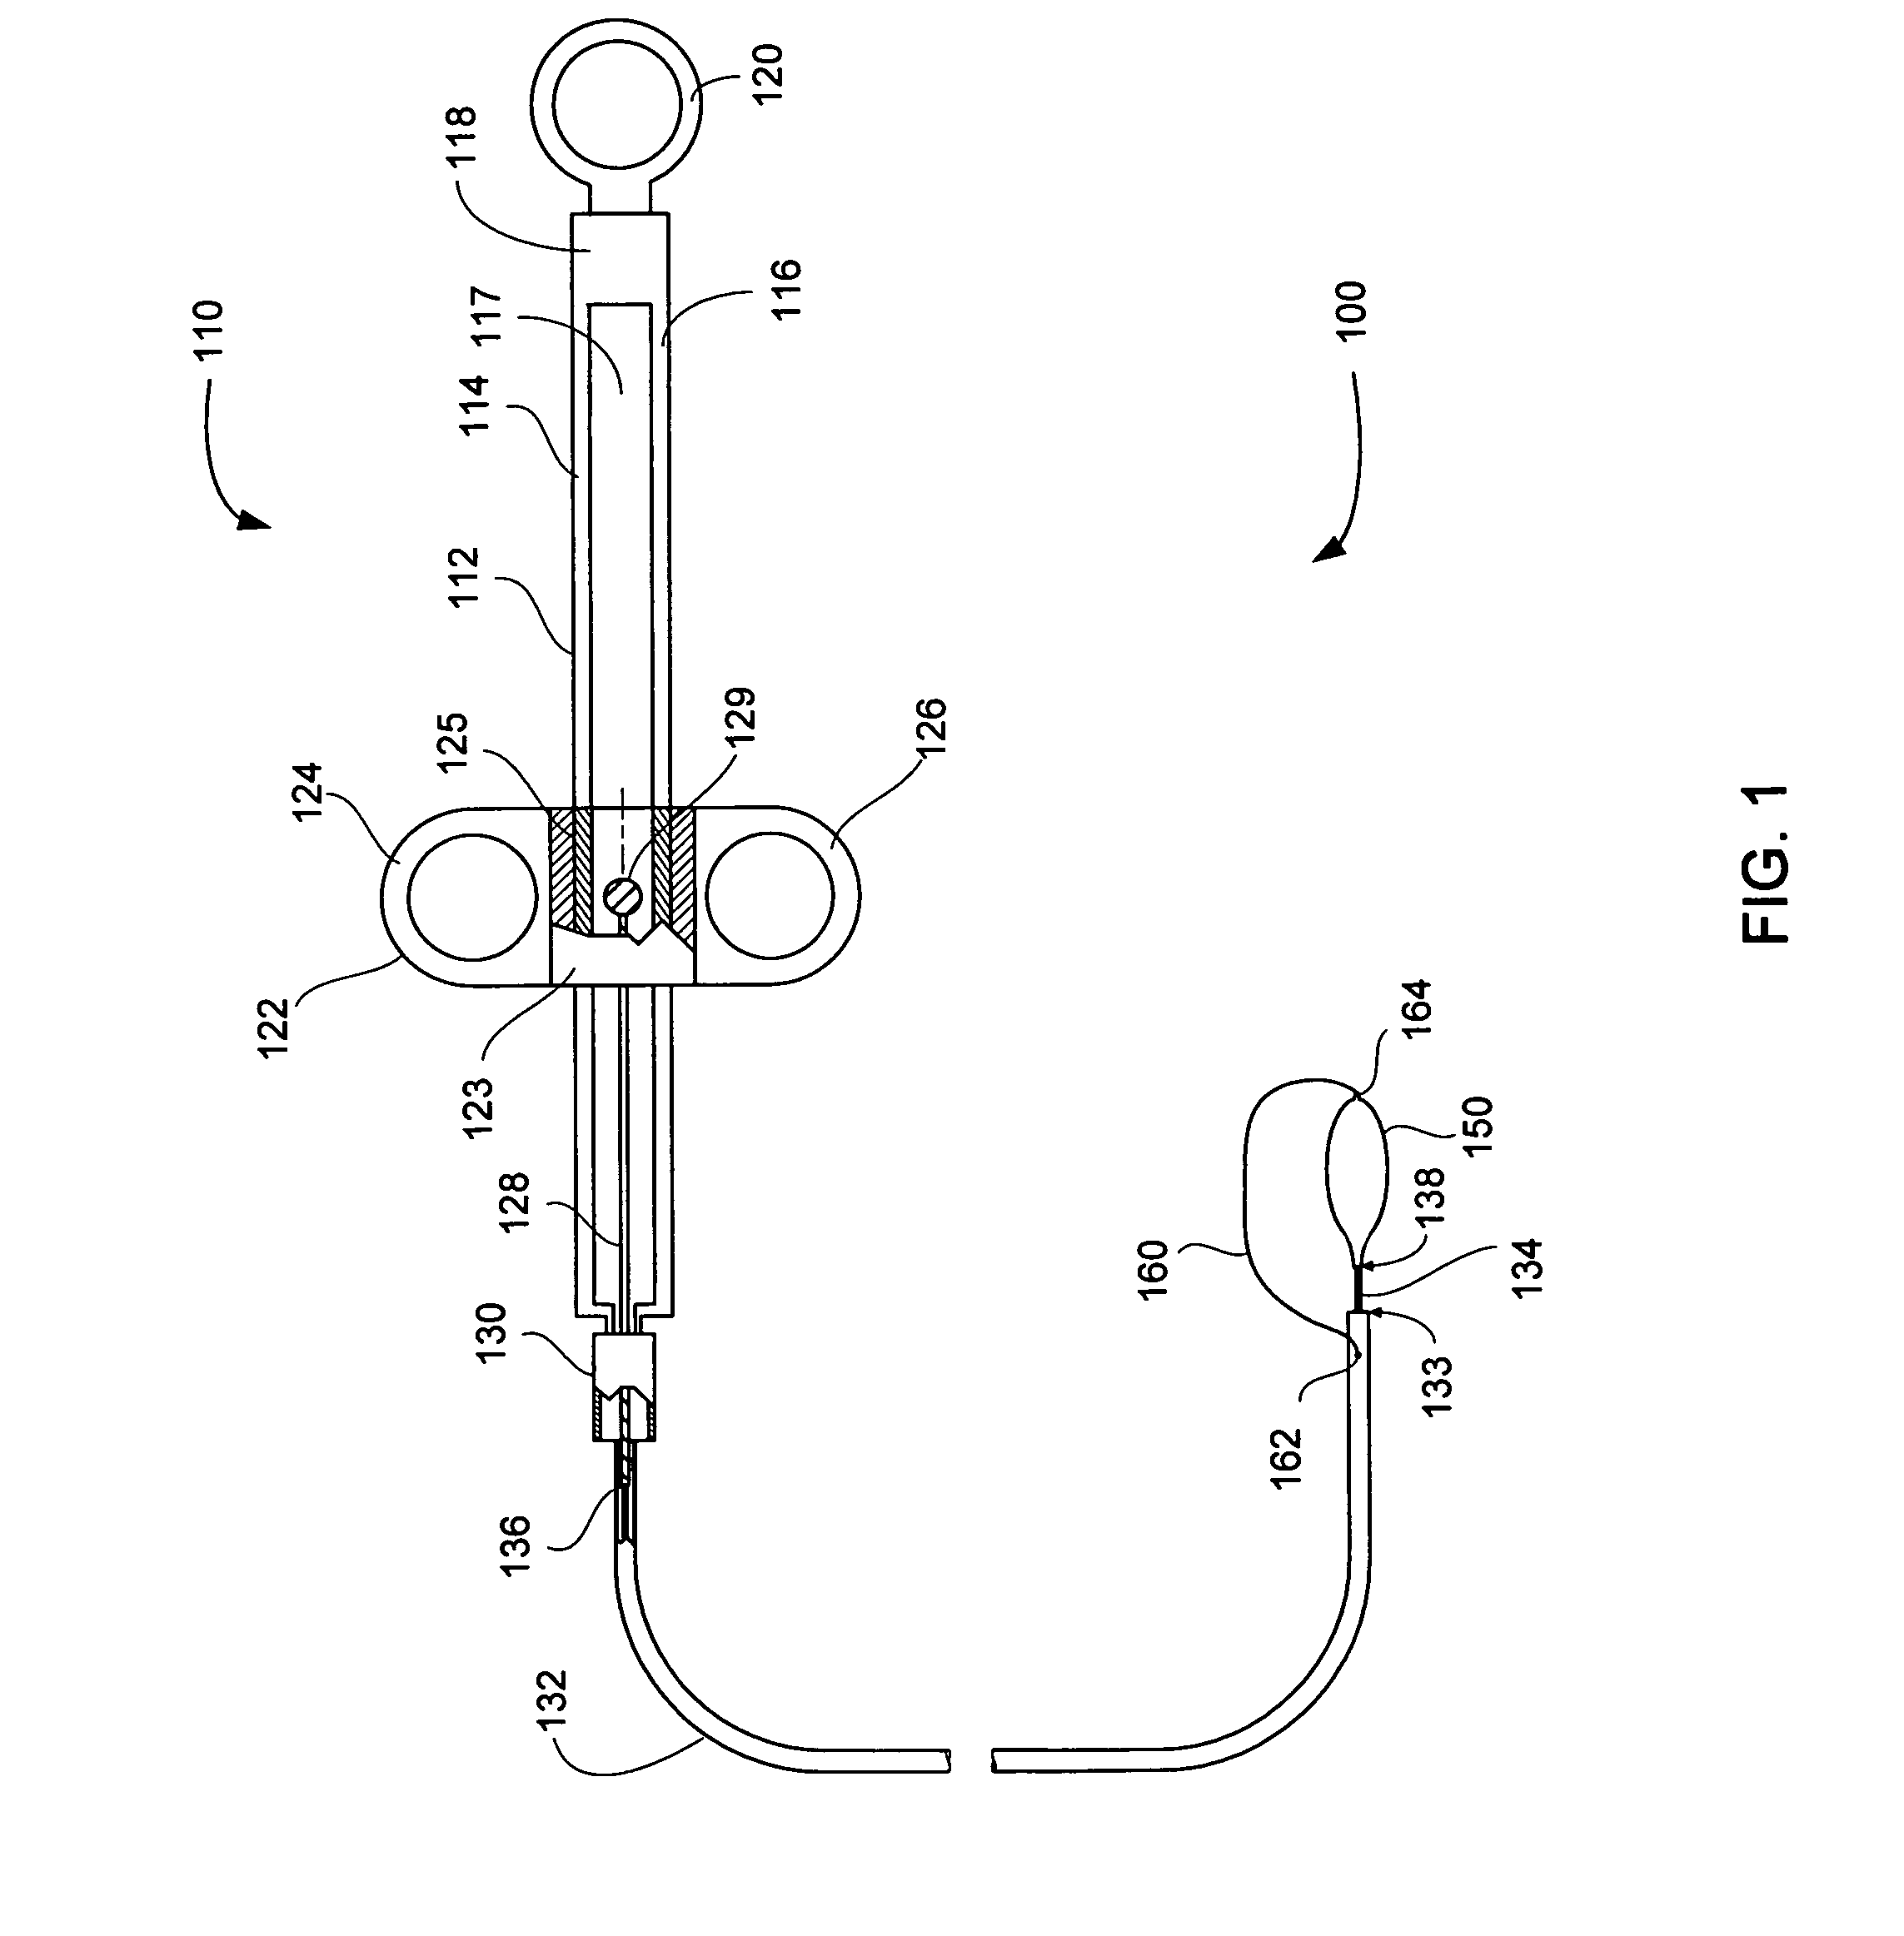 Automatically deforming surgical snare